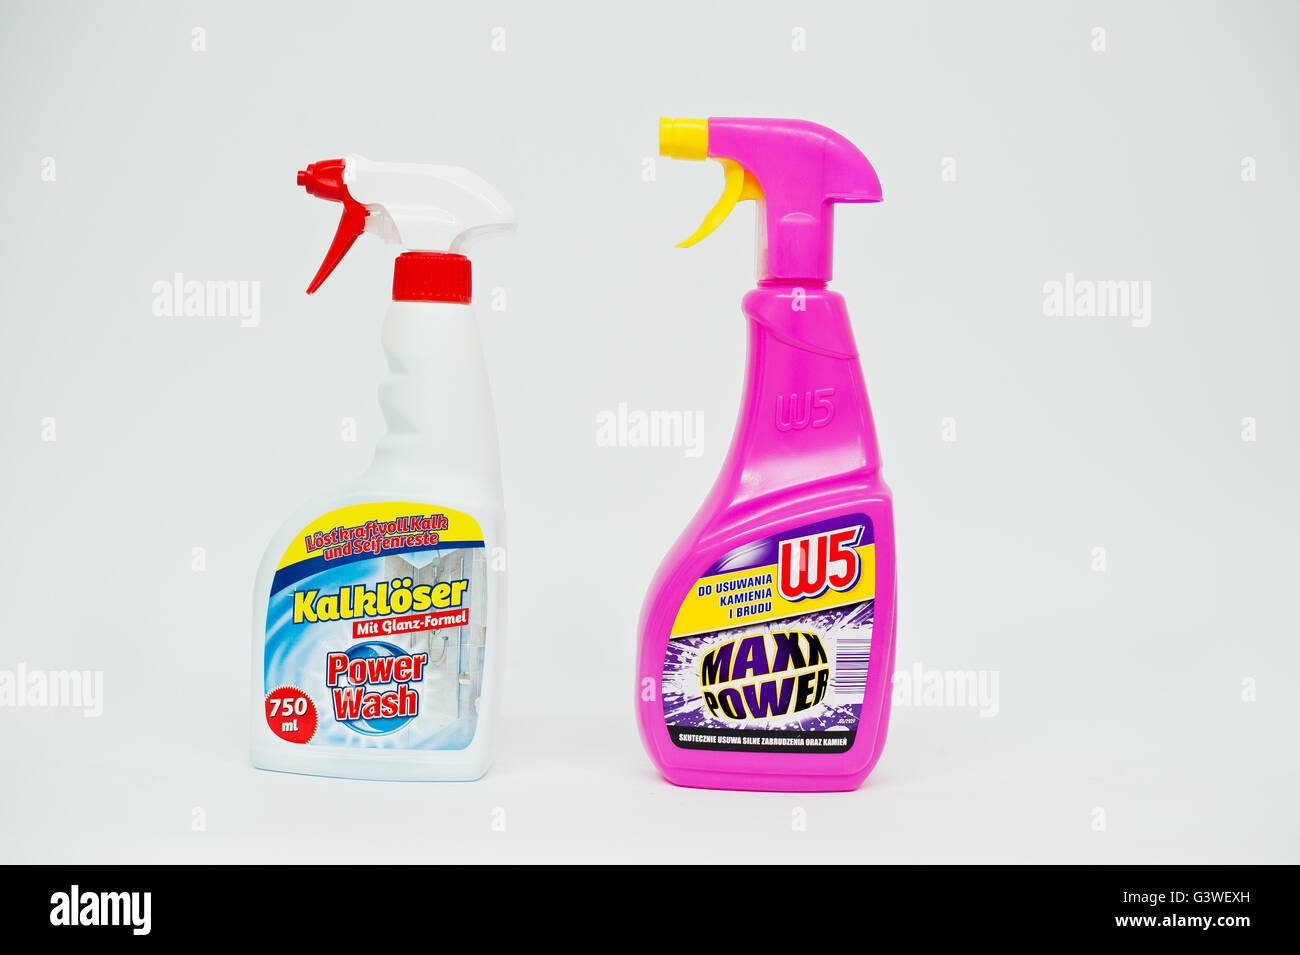 Download Drain Cleaner Bottle High Resolution Stock Photography And Images Alamy Yellowimages Mockups